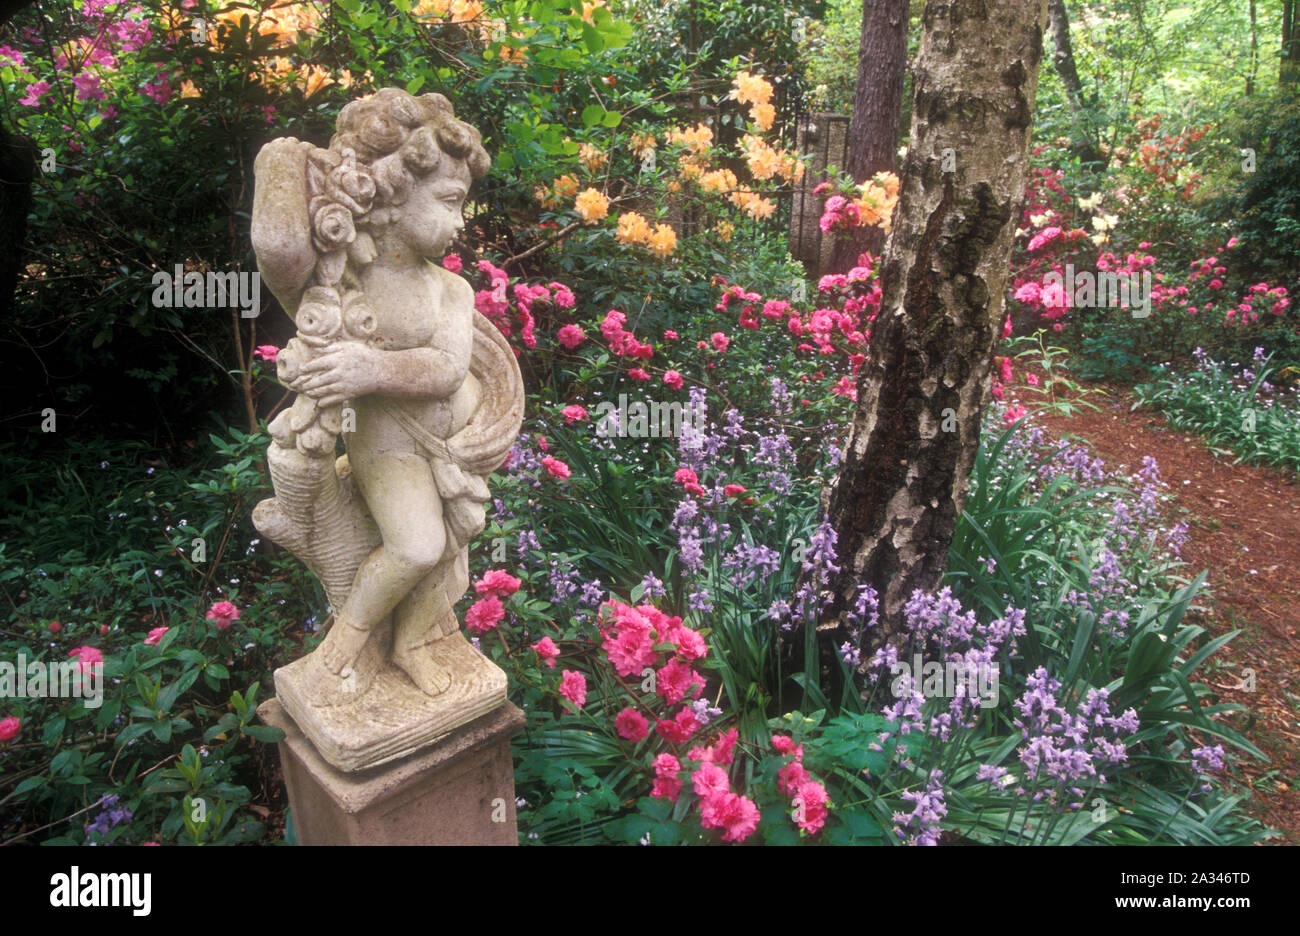 STATUE AND ASSORTED PLANTS AND SHRUBS IN A BEAUTIFUL BLUE MOUNTAINS GARDEN, NEW SOUTH WALES, AUSTRALIA. Stock Photo